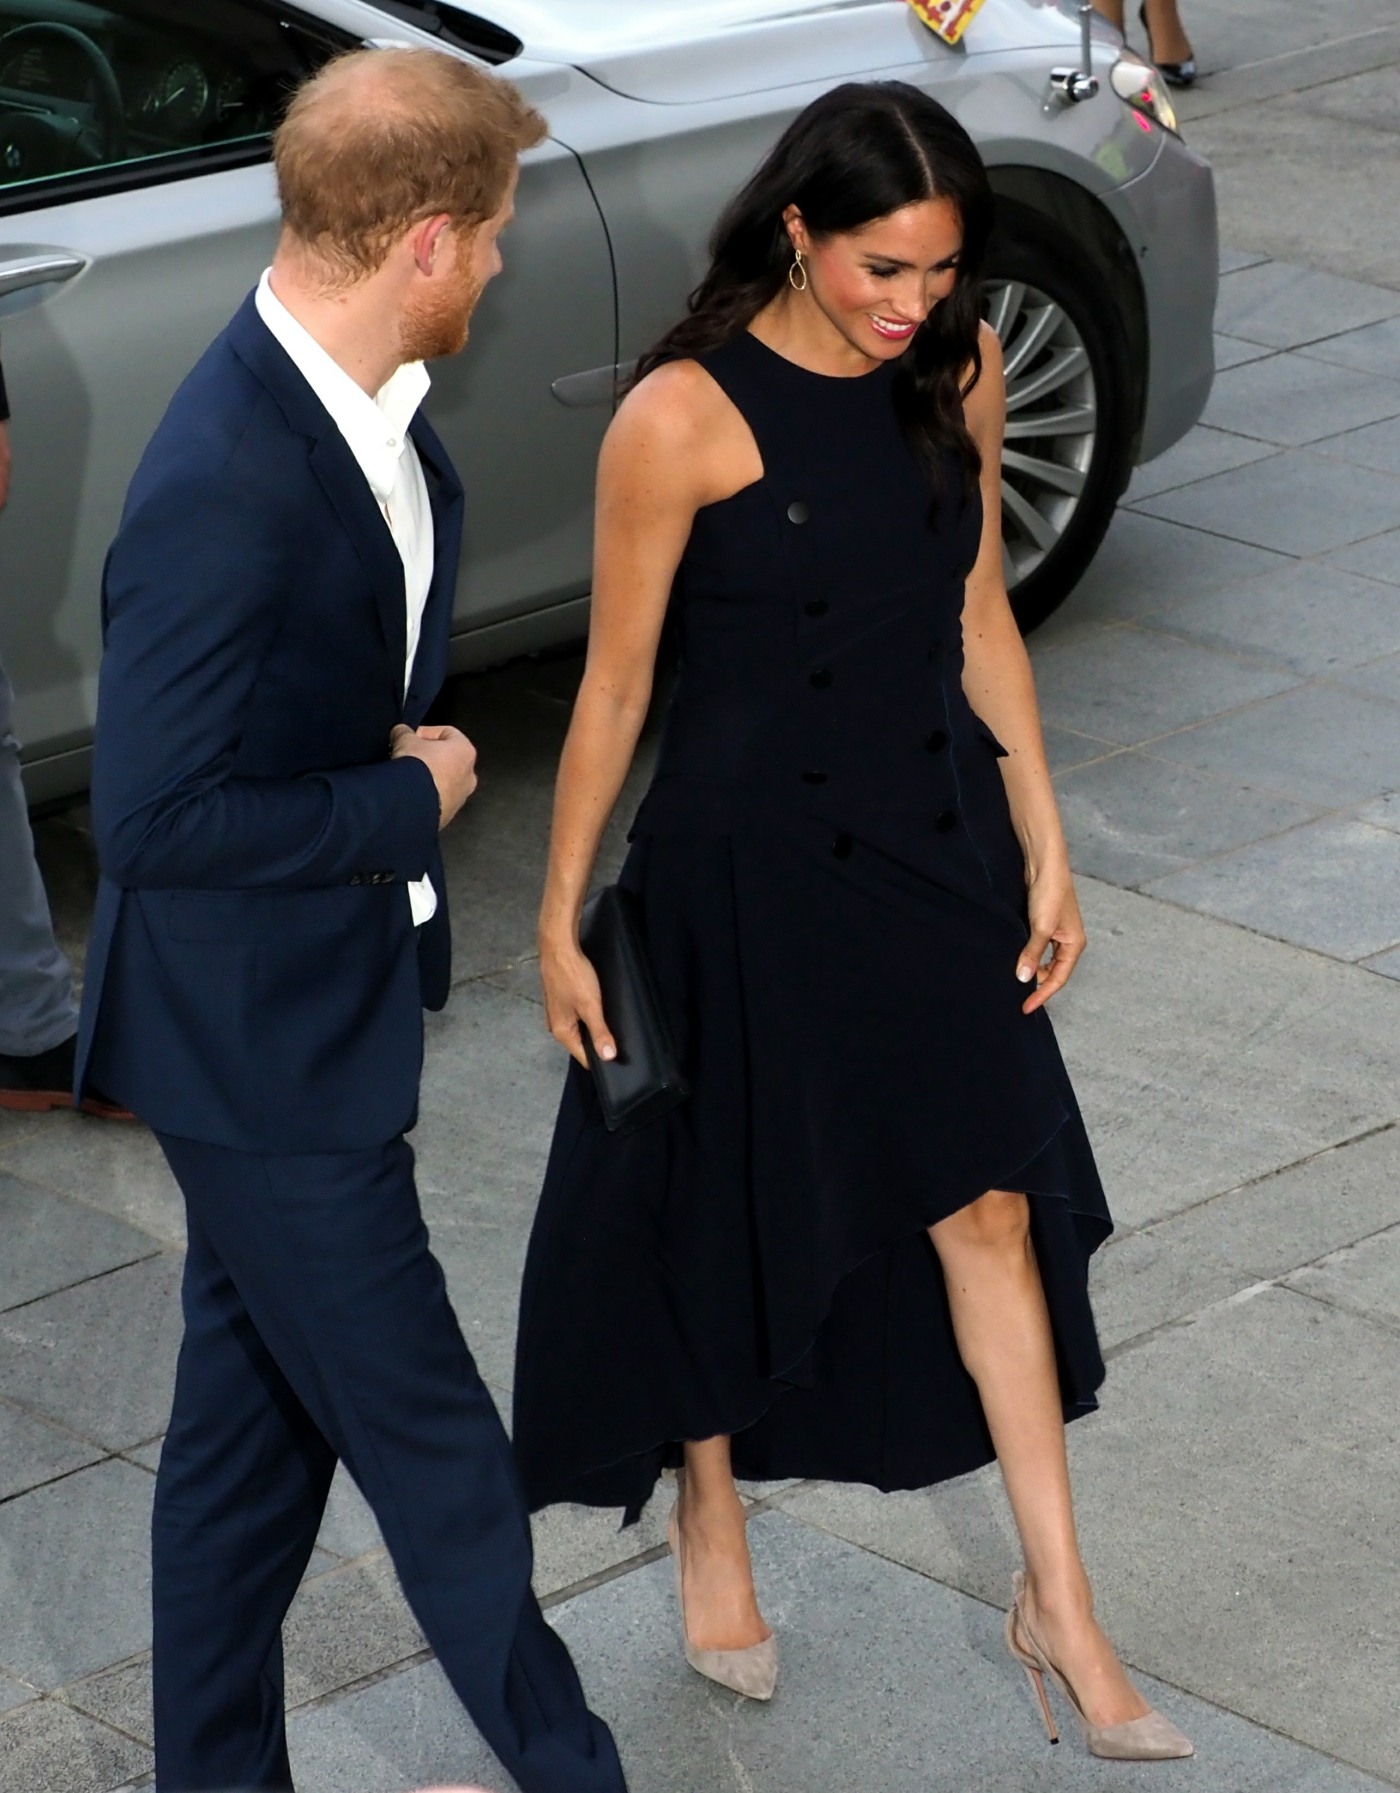 The Duke of Sussex and Duchess of Sussex are met by the Prime Minister of New Zealand